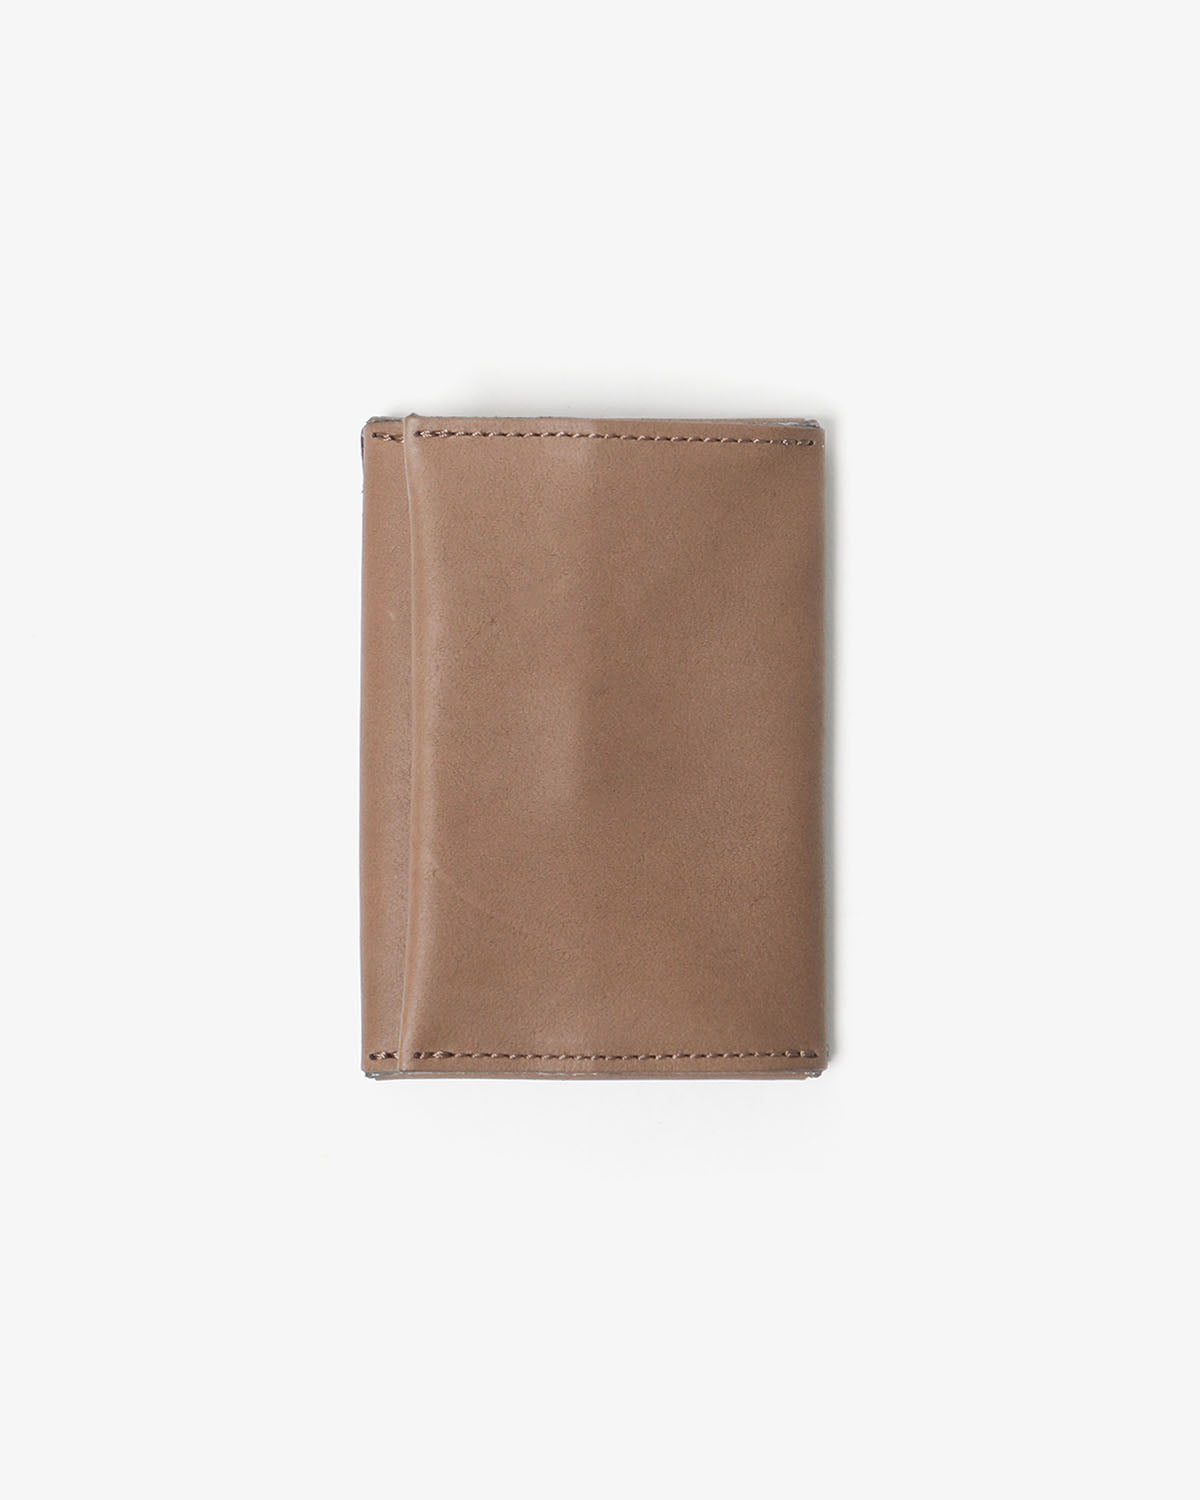 COIN / CARD CASE COW LEATHER